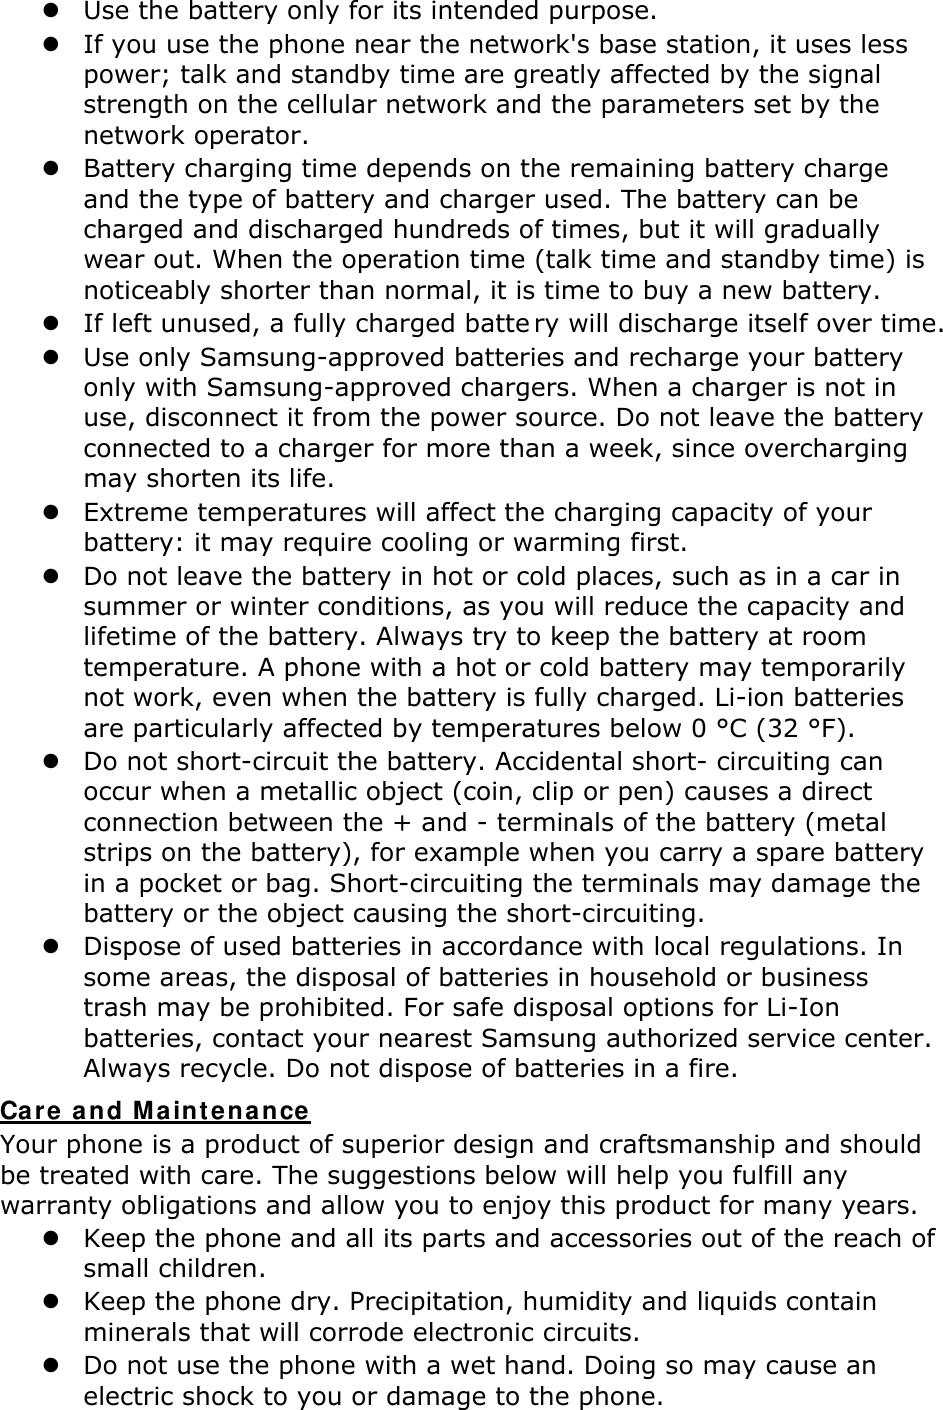  Use the battery only for its intended purpose.  If you use the phone near the network&apos;s base station, it uses less power; talk and standby time are greatly affected by the signal strength on the cellular network and the parameters set by the network operator.  Battery charging time depends on the remaining battery charge and the type of battery and charger used. The battery can be charged and discharged hundreds of times, but it will gradually wear out. When the operation time (talk time and standby time) is noticeably shorter than normal, it is time to buy a new battery.  If left unused, a fully charged batte ry will discharge itself over time.   Use only Samsung-approved batteries and recharge your battery only with Samsung-approved chargers. When a charger is not in use, disconnect it from the power source. Do not leave the battery connected to a charger for more than a week, since overcharging may shorten its life.  Extreme temperatures will affect the charging capacity of your battery: it may require cooling or warming first.  Do not leave the battery in hot or cold places, such as in a car in summer or winter conditions, as you will reduce the capacity and lifetime of the battery. Always try to keep the battery at room temperature. A phone with a hot or cold battery may temporarily not work, even when the battery is fully charged. Li-ion batteries are particularly affected by temperatures below 0 °C (32 °F).  Do not short-circuit the battery. Accidental short- circuiting can occur when a metallic object (coin, clip or pen) causes a direct connection between the + and - terminals of the battery (metal strips on the battery), for example when you carry a spare battery in a pocket or bag. Short-circuiting the terminals may damage the battery or the object causing the short-circuiting.  Dispose of used batteries in accordance with local regulations. In some areas, the disposal of batteries in household or business trash may be prohibited. For safe disposal options for Li-Ion batteries, contact your nearest Samsung authorized service center. Always recycle. Do not dispose of batteries in a fire. Care a nd Maint ena nce  Your phone is a product of superior design and craftsmanship and should be treated with care. The suggestions below will help you fulfill any warranty obligations and allow you to enjoy this product for many years.  Keep the phone and all its parts and accessories out of the reach of small children.  Keep the phone dry. Precipitation, humidity and liquids contain minerals that will corrode electronic circuits.  Do not use the phone with a wet hand. Doing so may cause an electric shock to you or damage to the phone. 